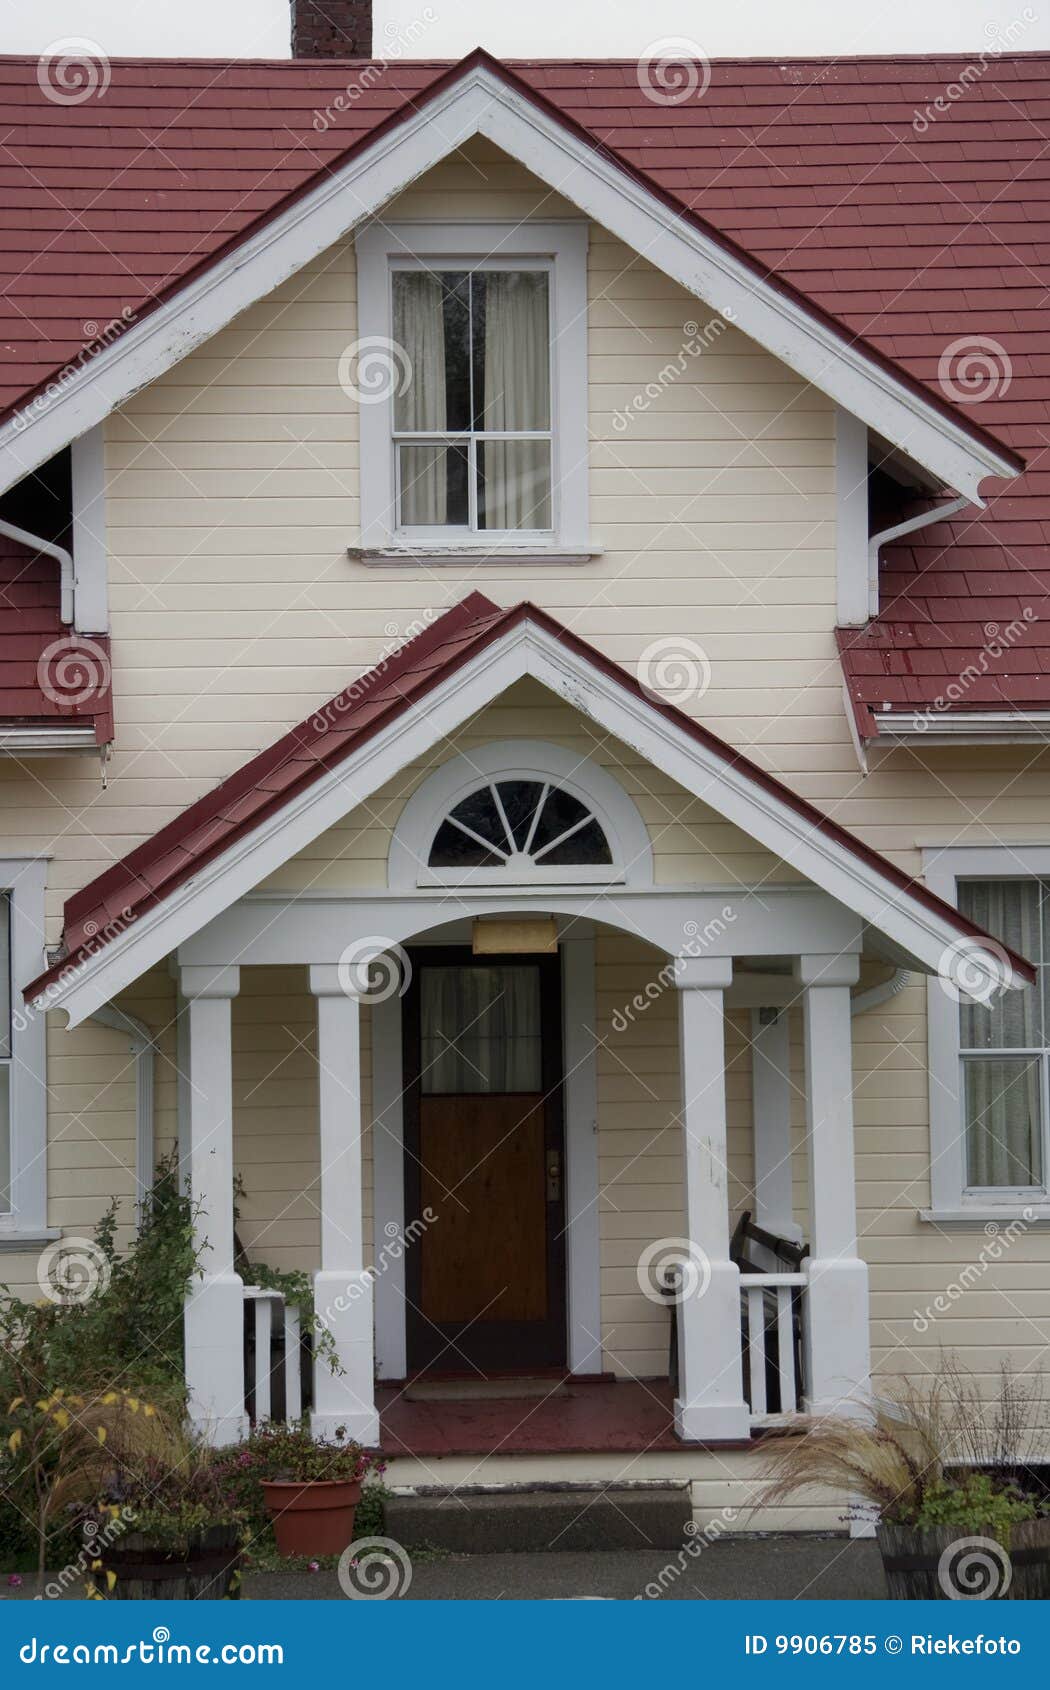 Front Porch And Entry Of Craftsman style Home Royalty Free  